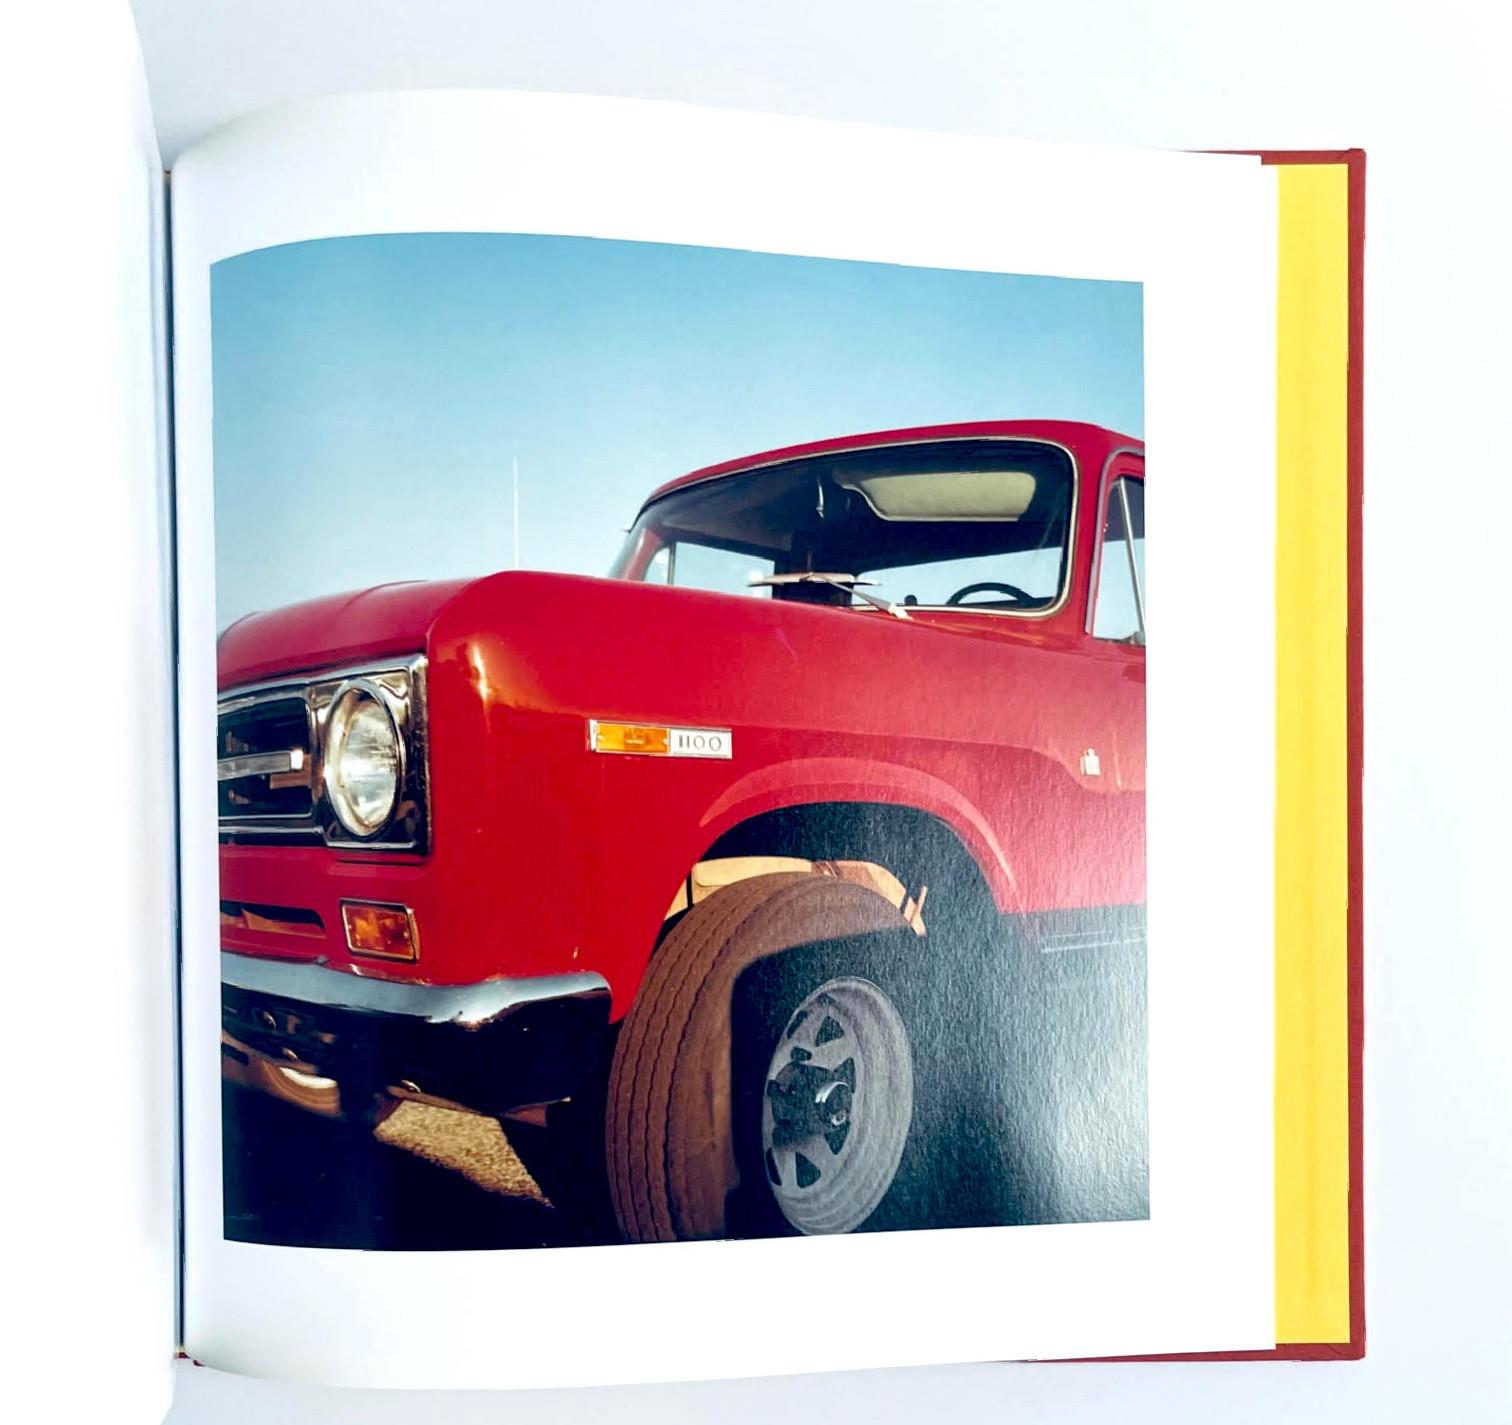 2 1/4 Eggleston (Limited Edition Monograph Hand signed by William Eggleston) For Sale 11